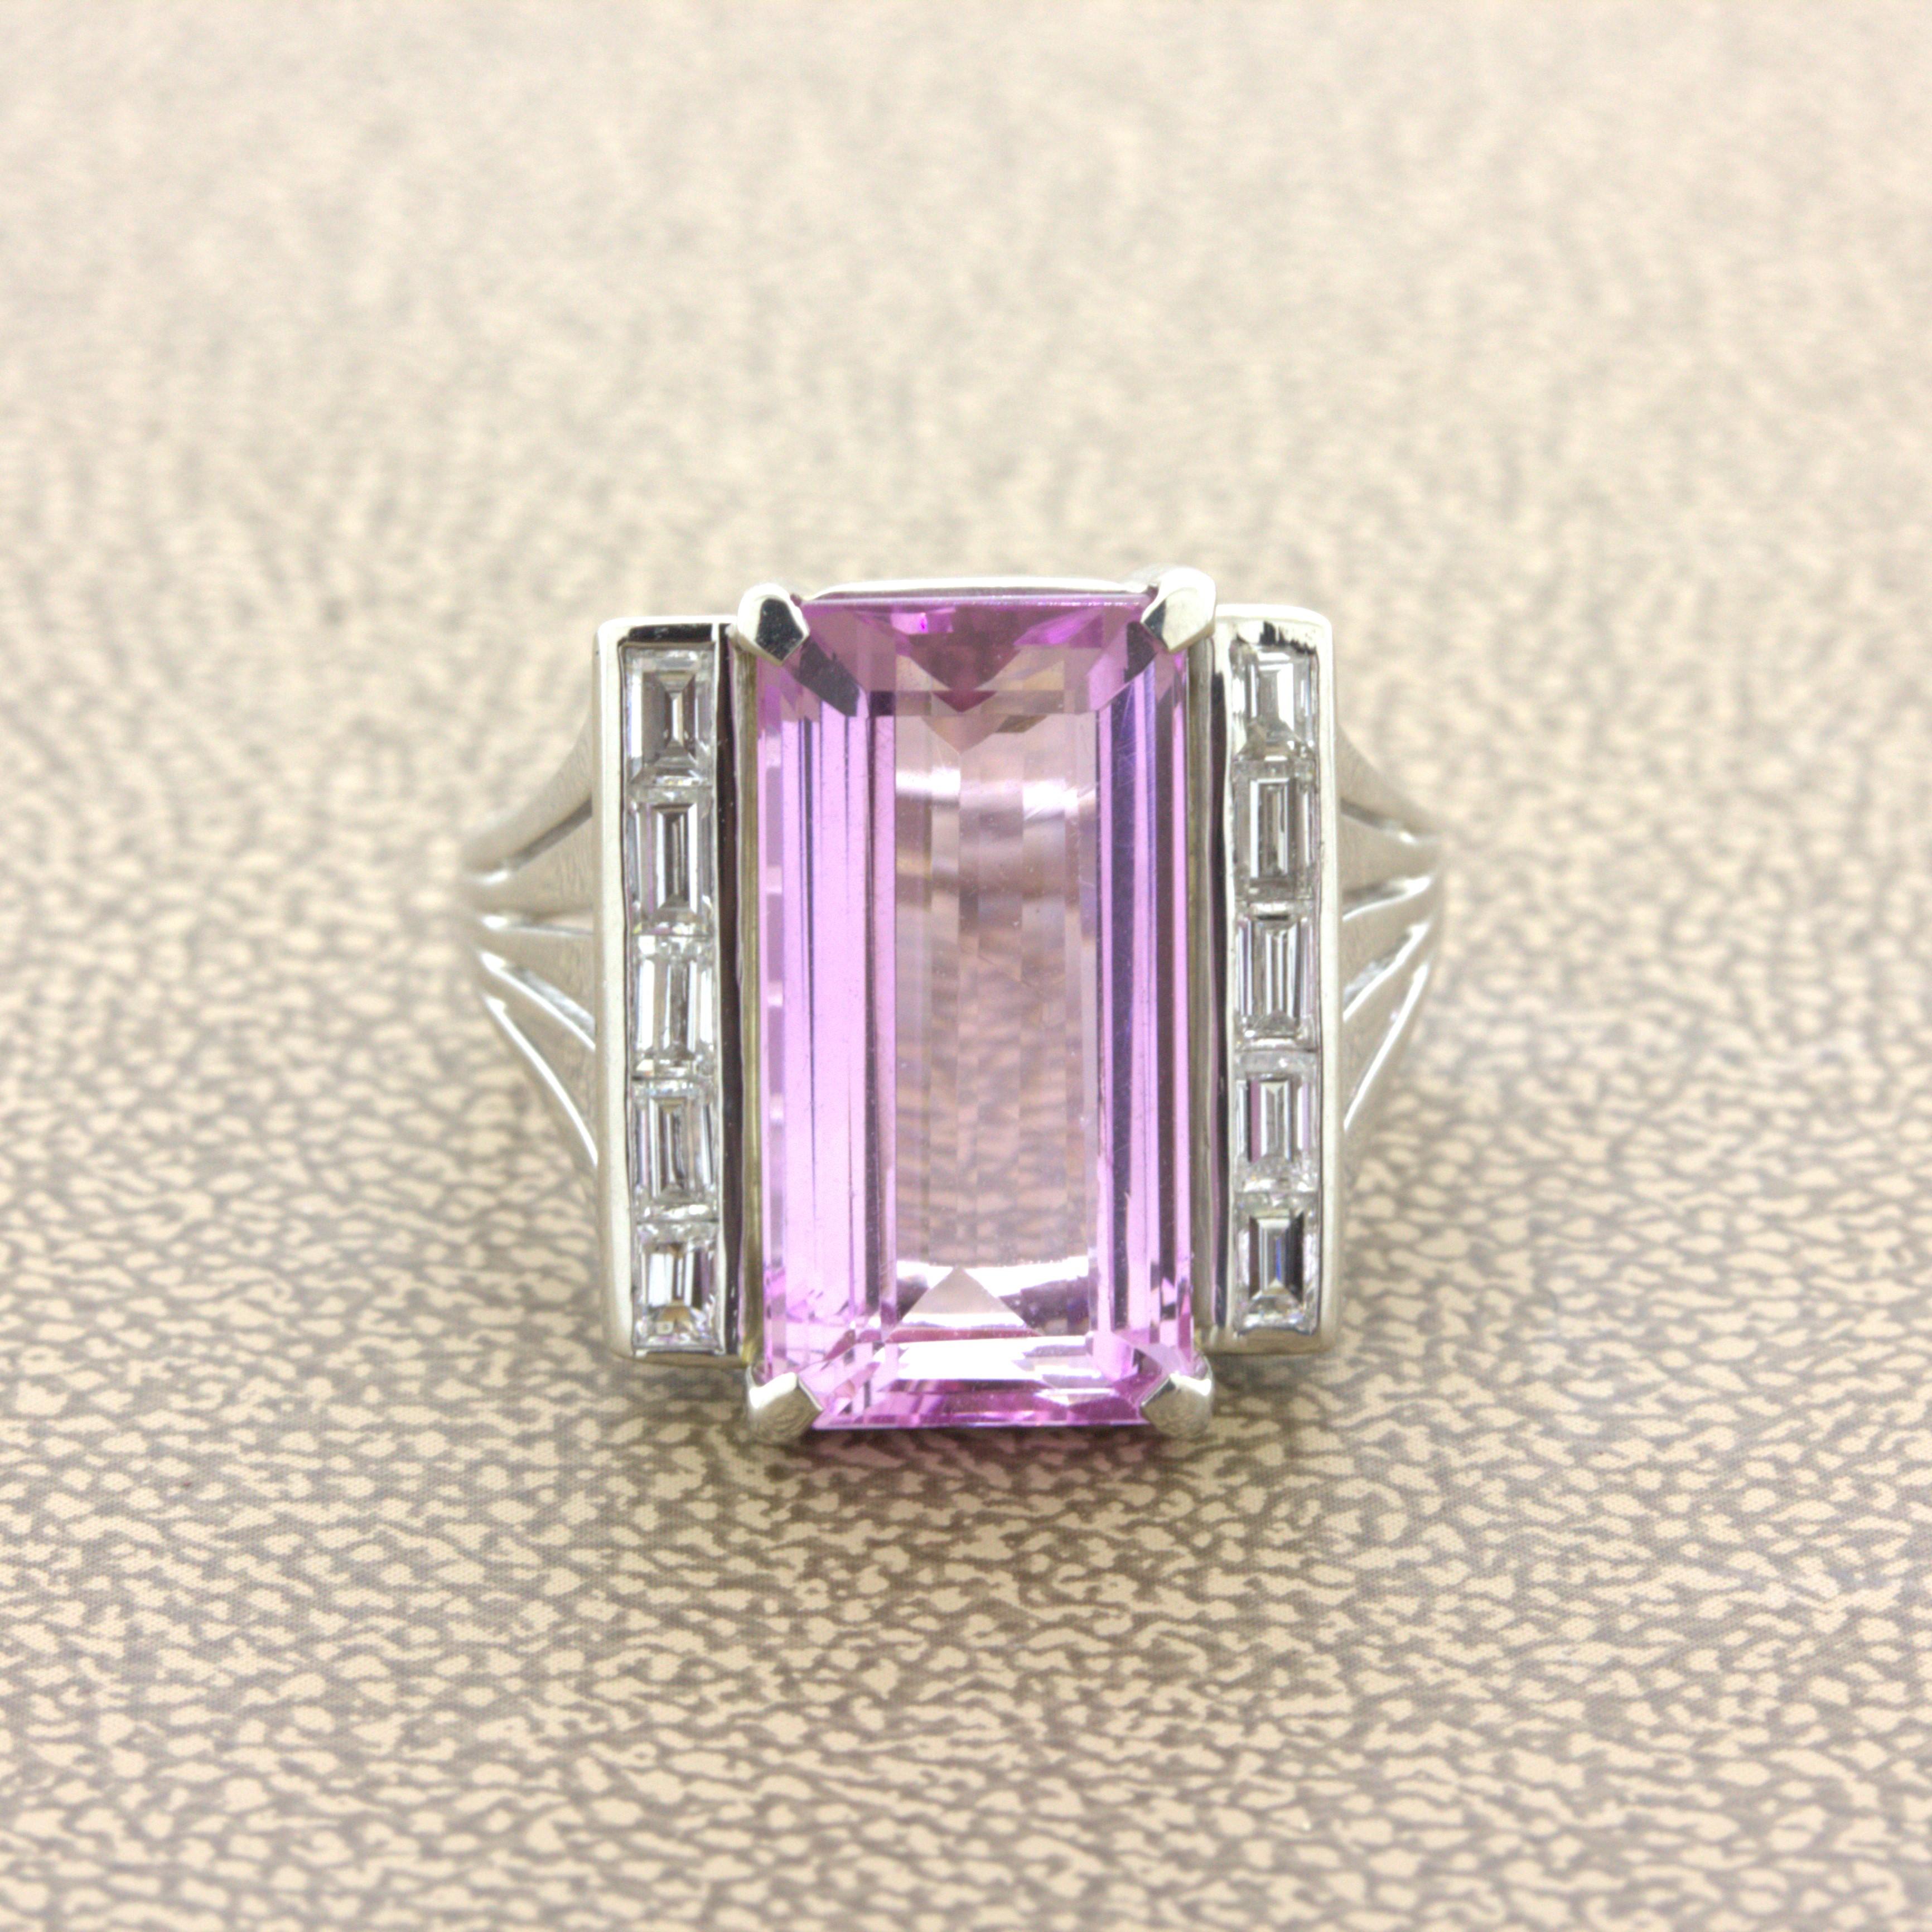 Everything is better in pink! Especially this lovely imperial topaz ring with a very rare bright vivid pink color. It weighs 7.80 carats and stones like this are very rarely found in the market. It is complemented by 8 baguette-cut diamonds